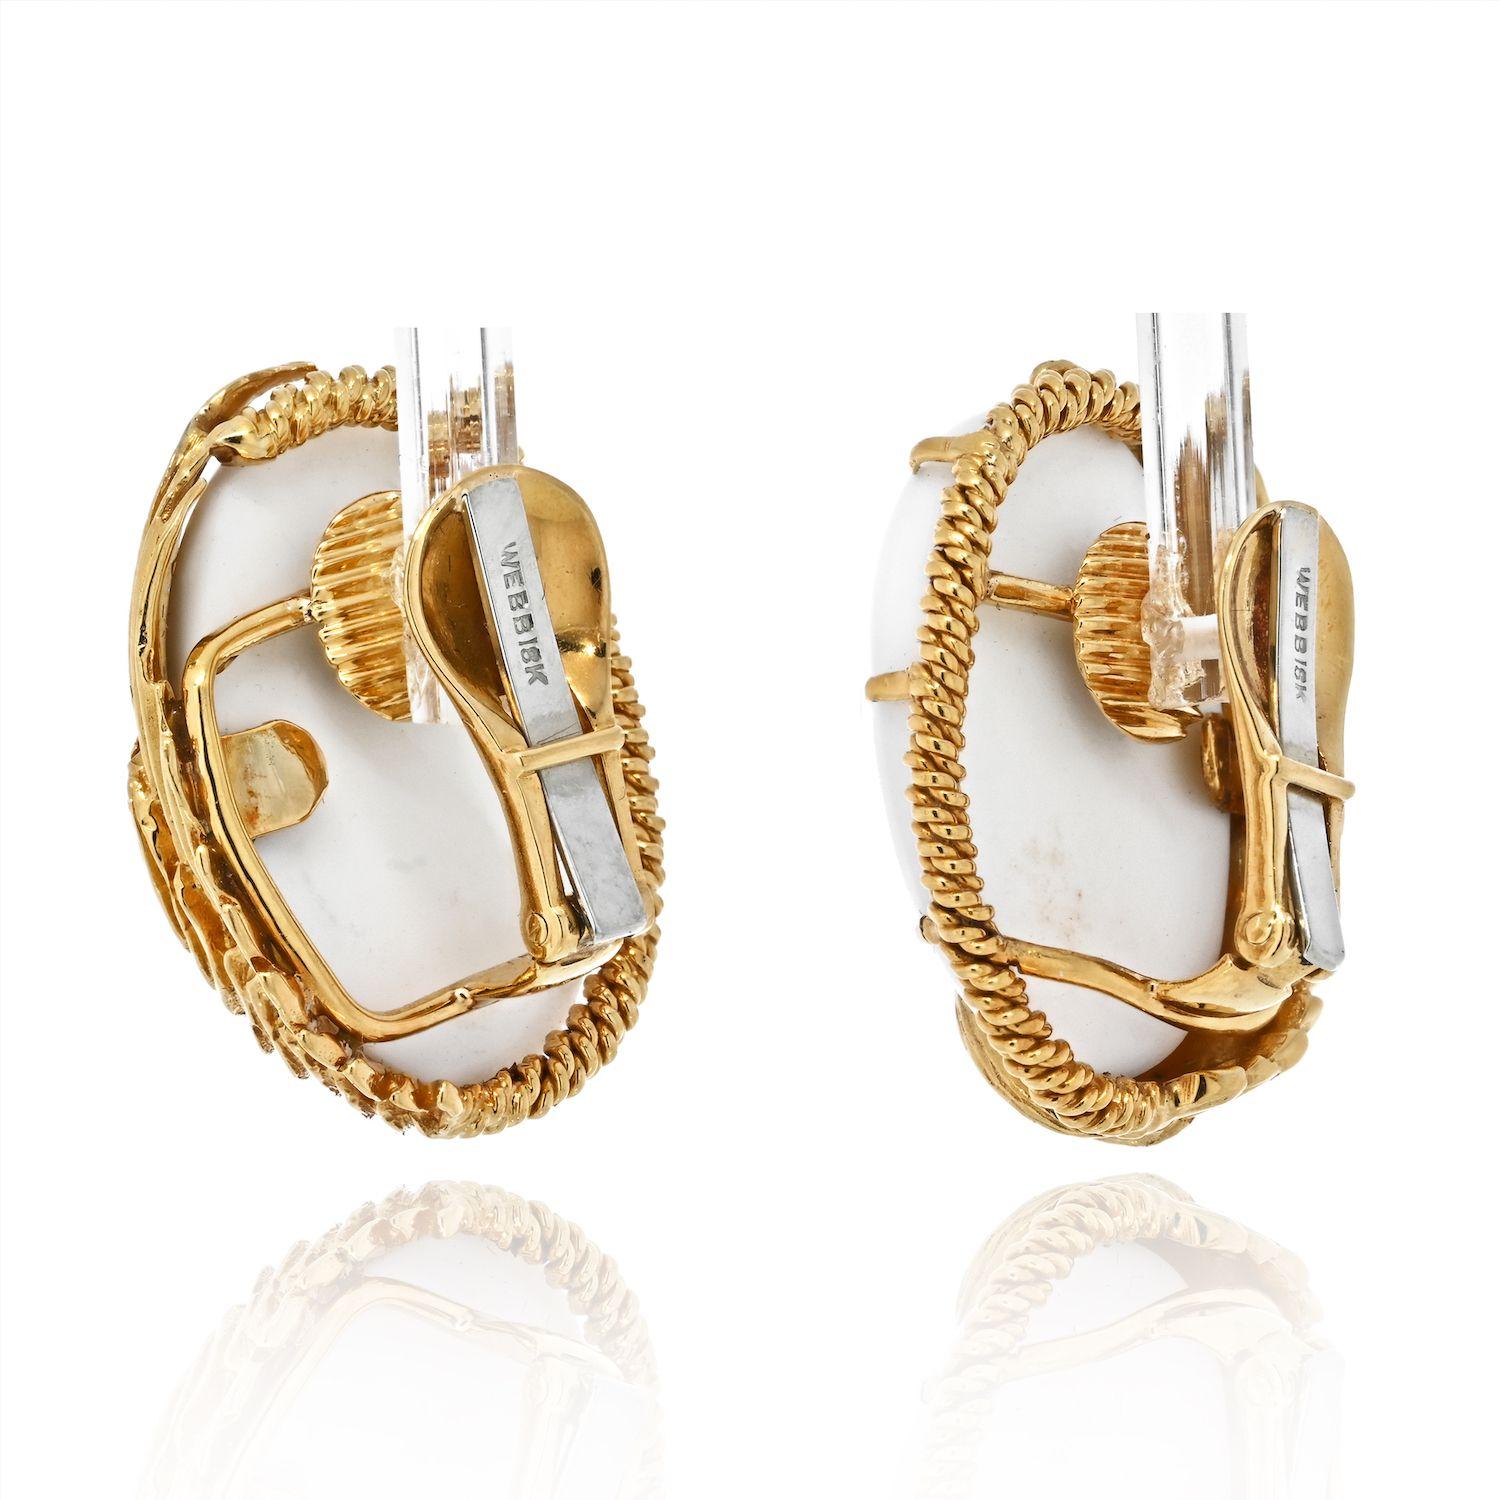 David Webb 18K Yellow Gold white coral oval clip on earrings. Classic and elegant option for an everyday wear. 
0.7 inches long. 
Clip on closure.